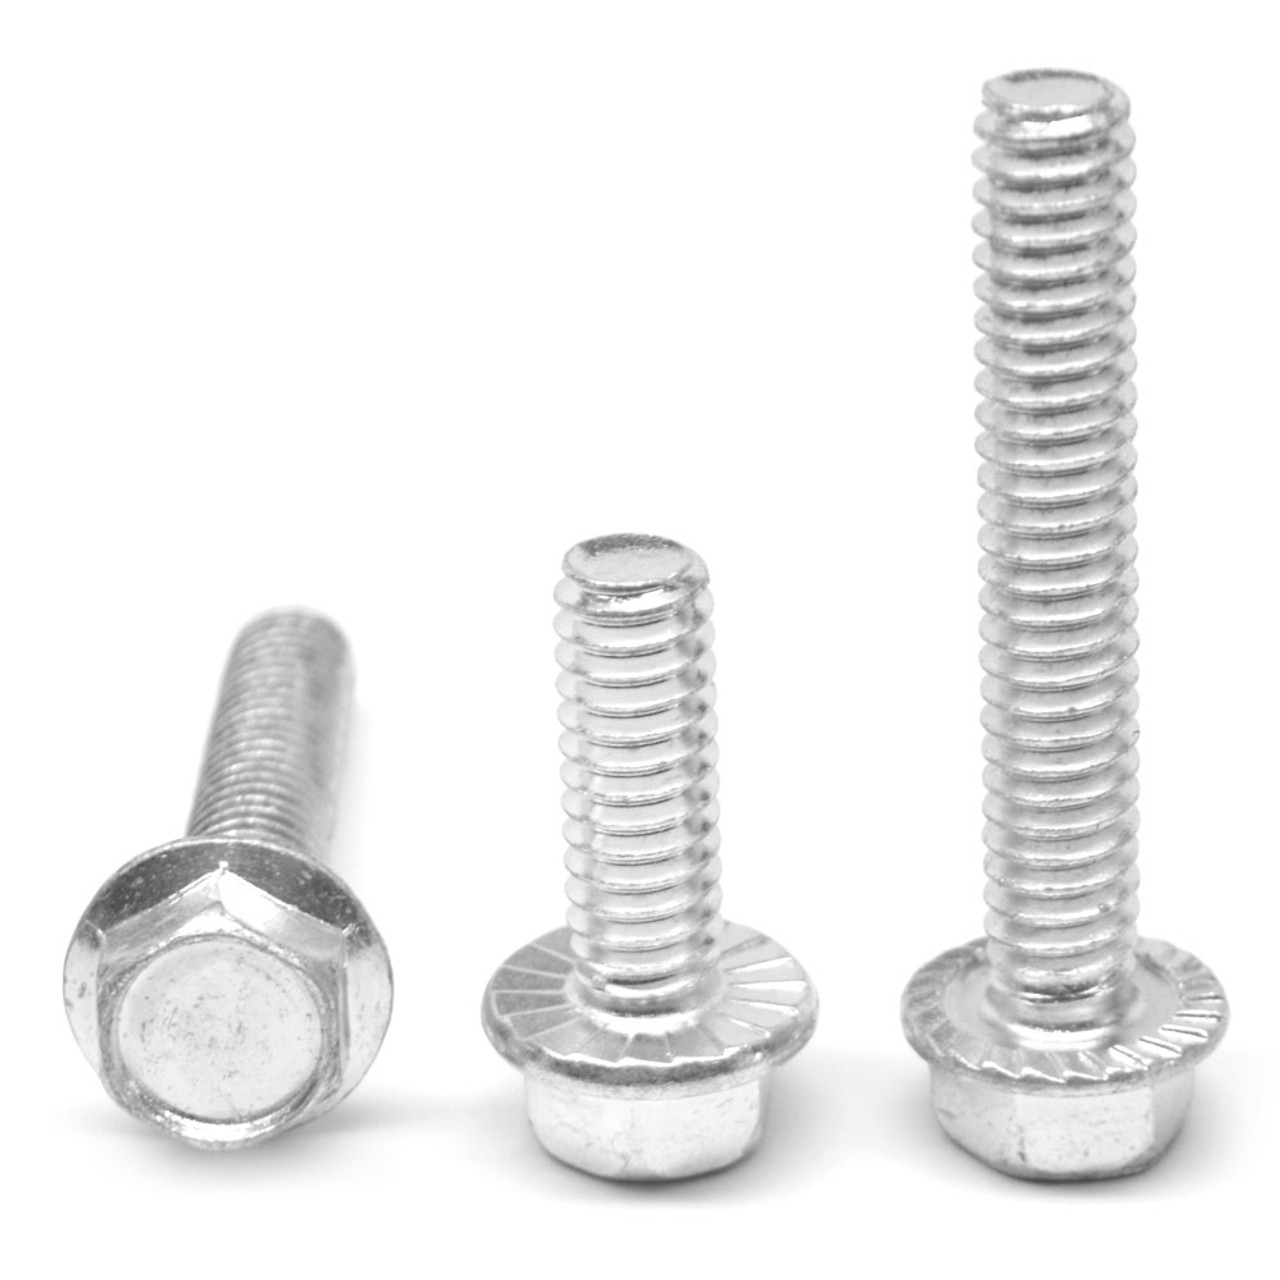 5/16"-18x1 3/4" (FT) Coarse Thread Hex Flange Screw with Serration Stainless Steel 18-8 Wax